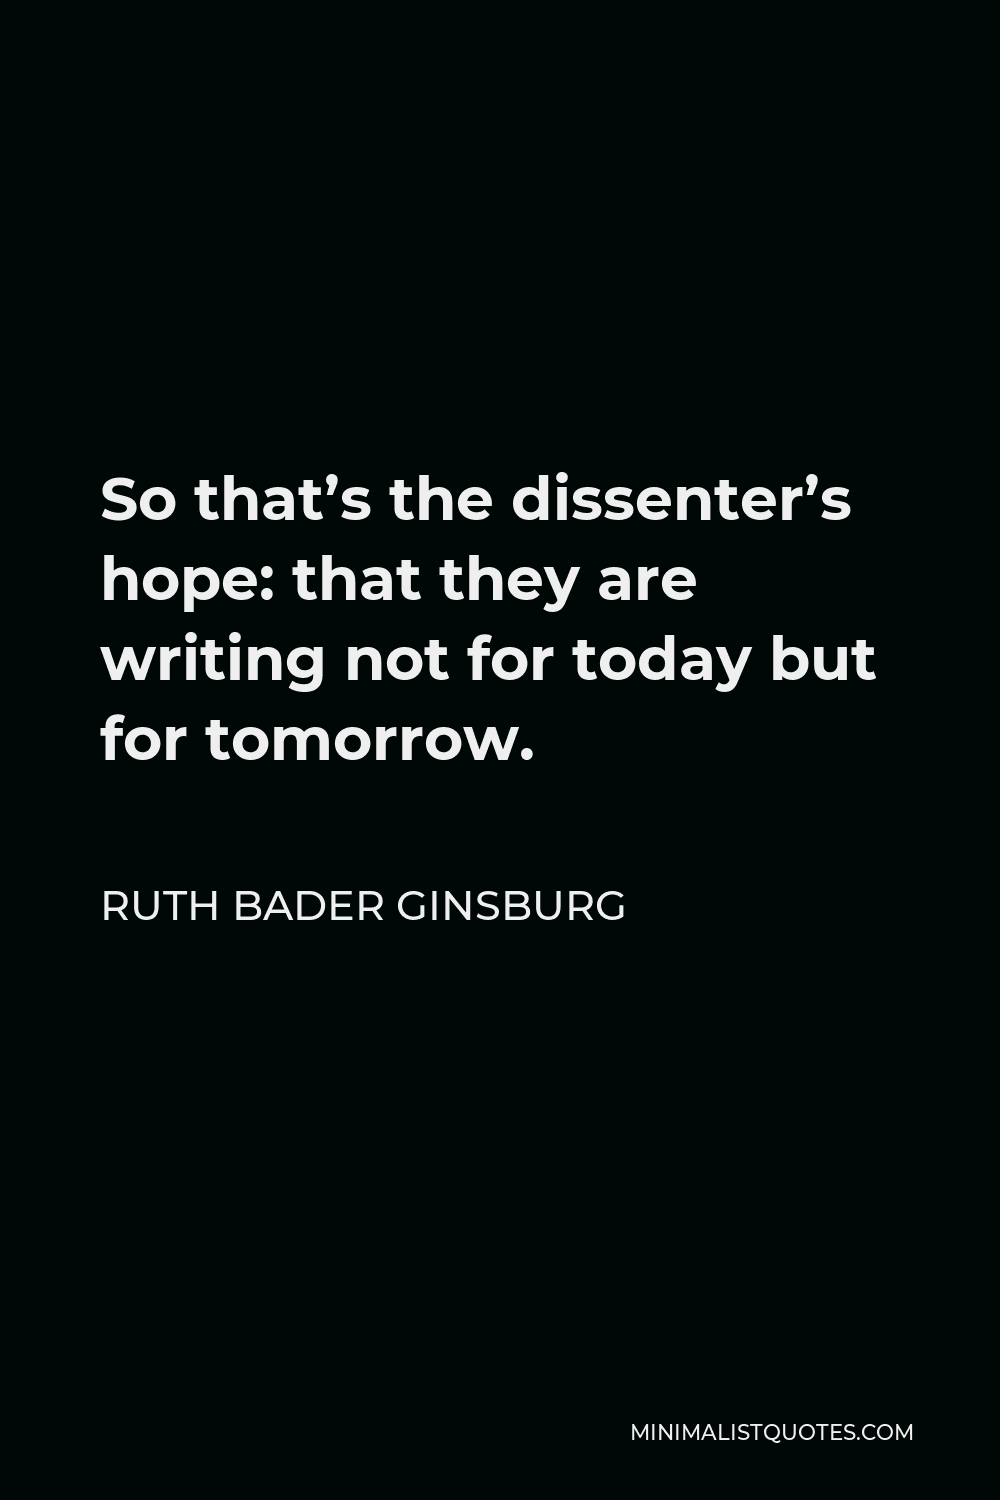 Ruth Bader Ginsburg Quote - So that’s the dissenter’s hope: that they are writing not for today but for tomorrow.